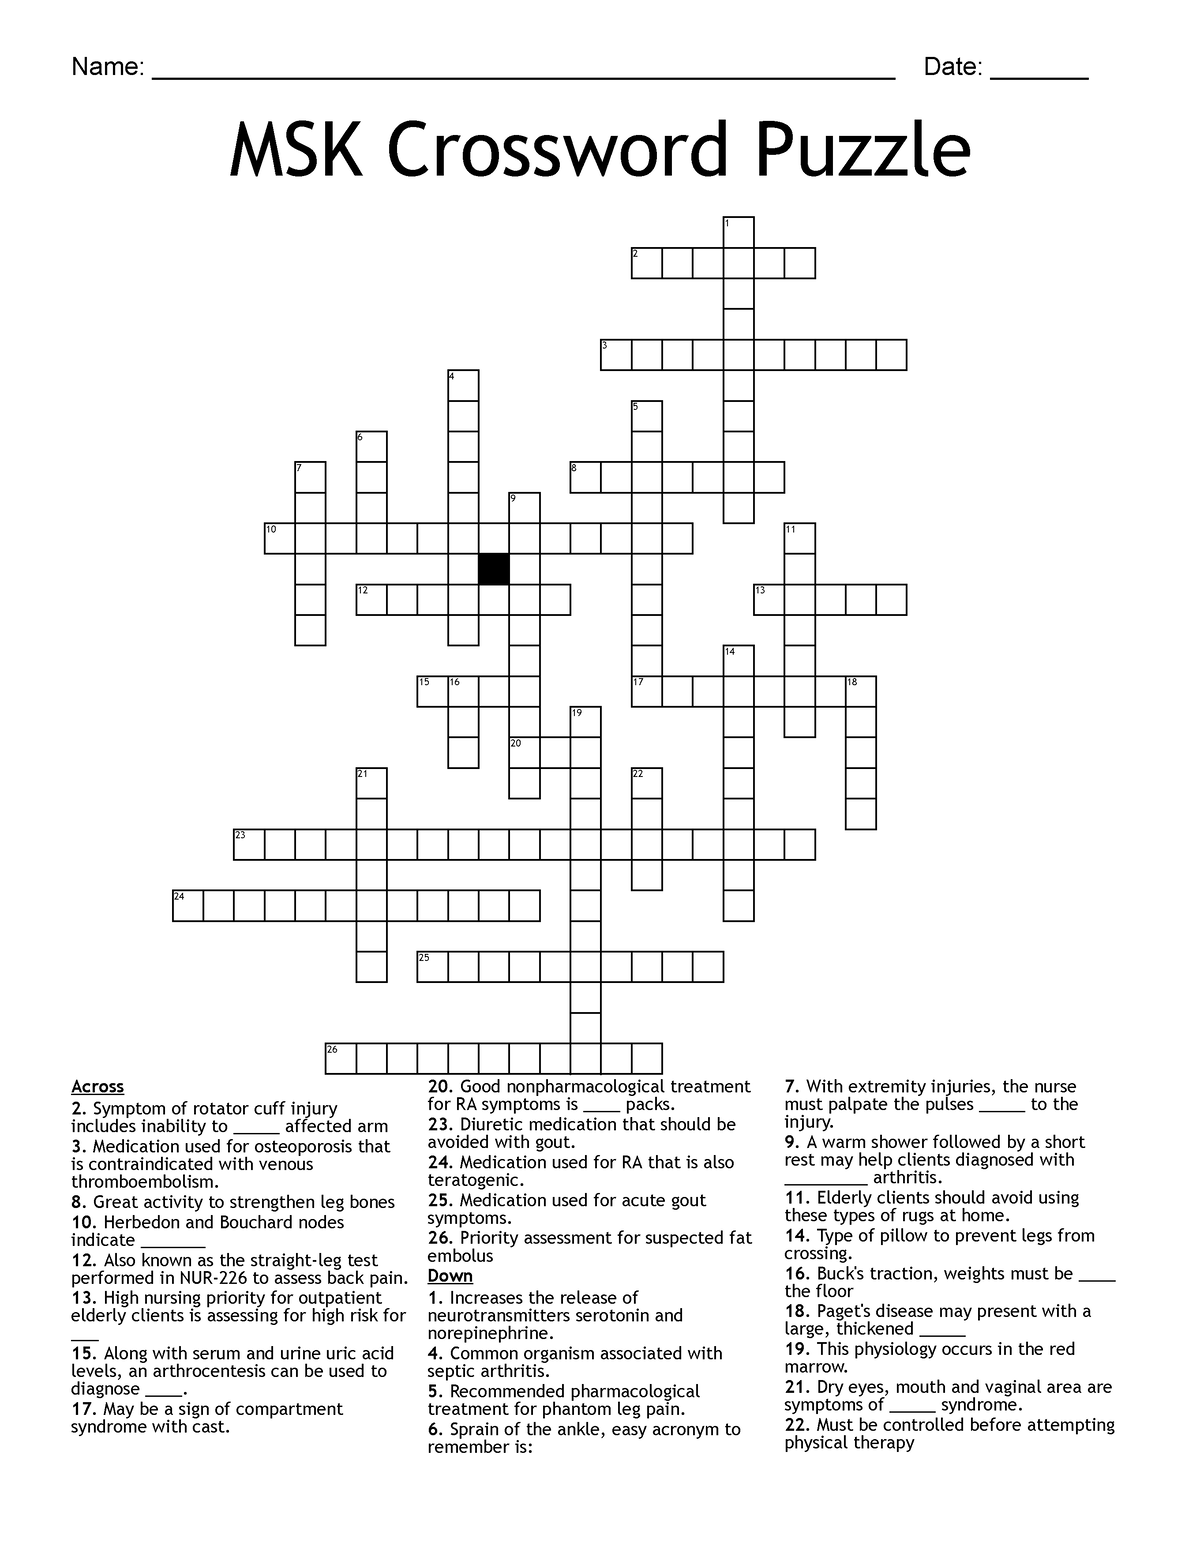 MSK Crossword Puzzle Musculoskeletal Name